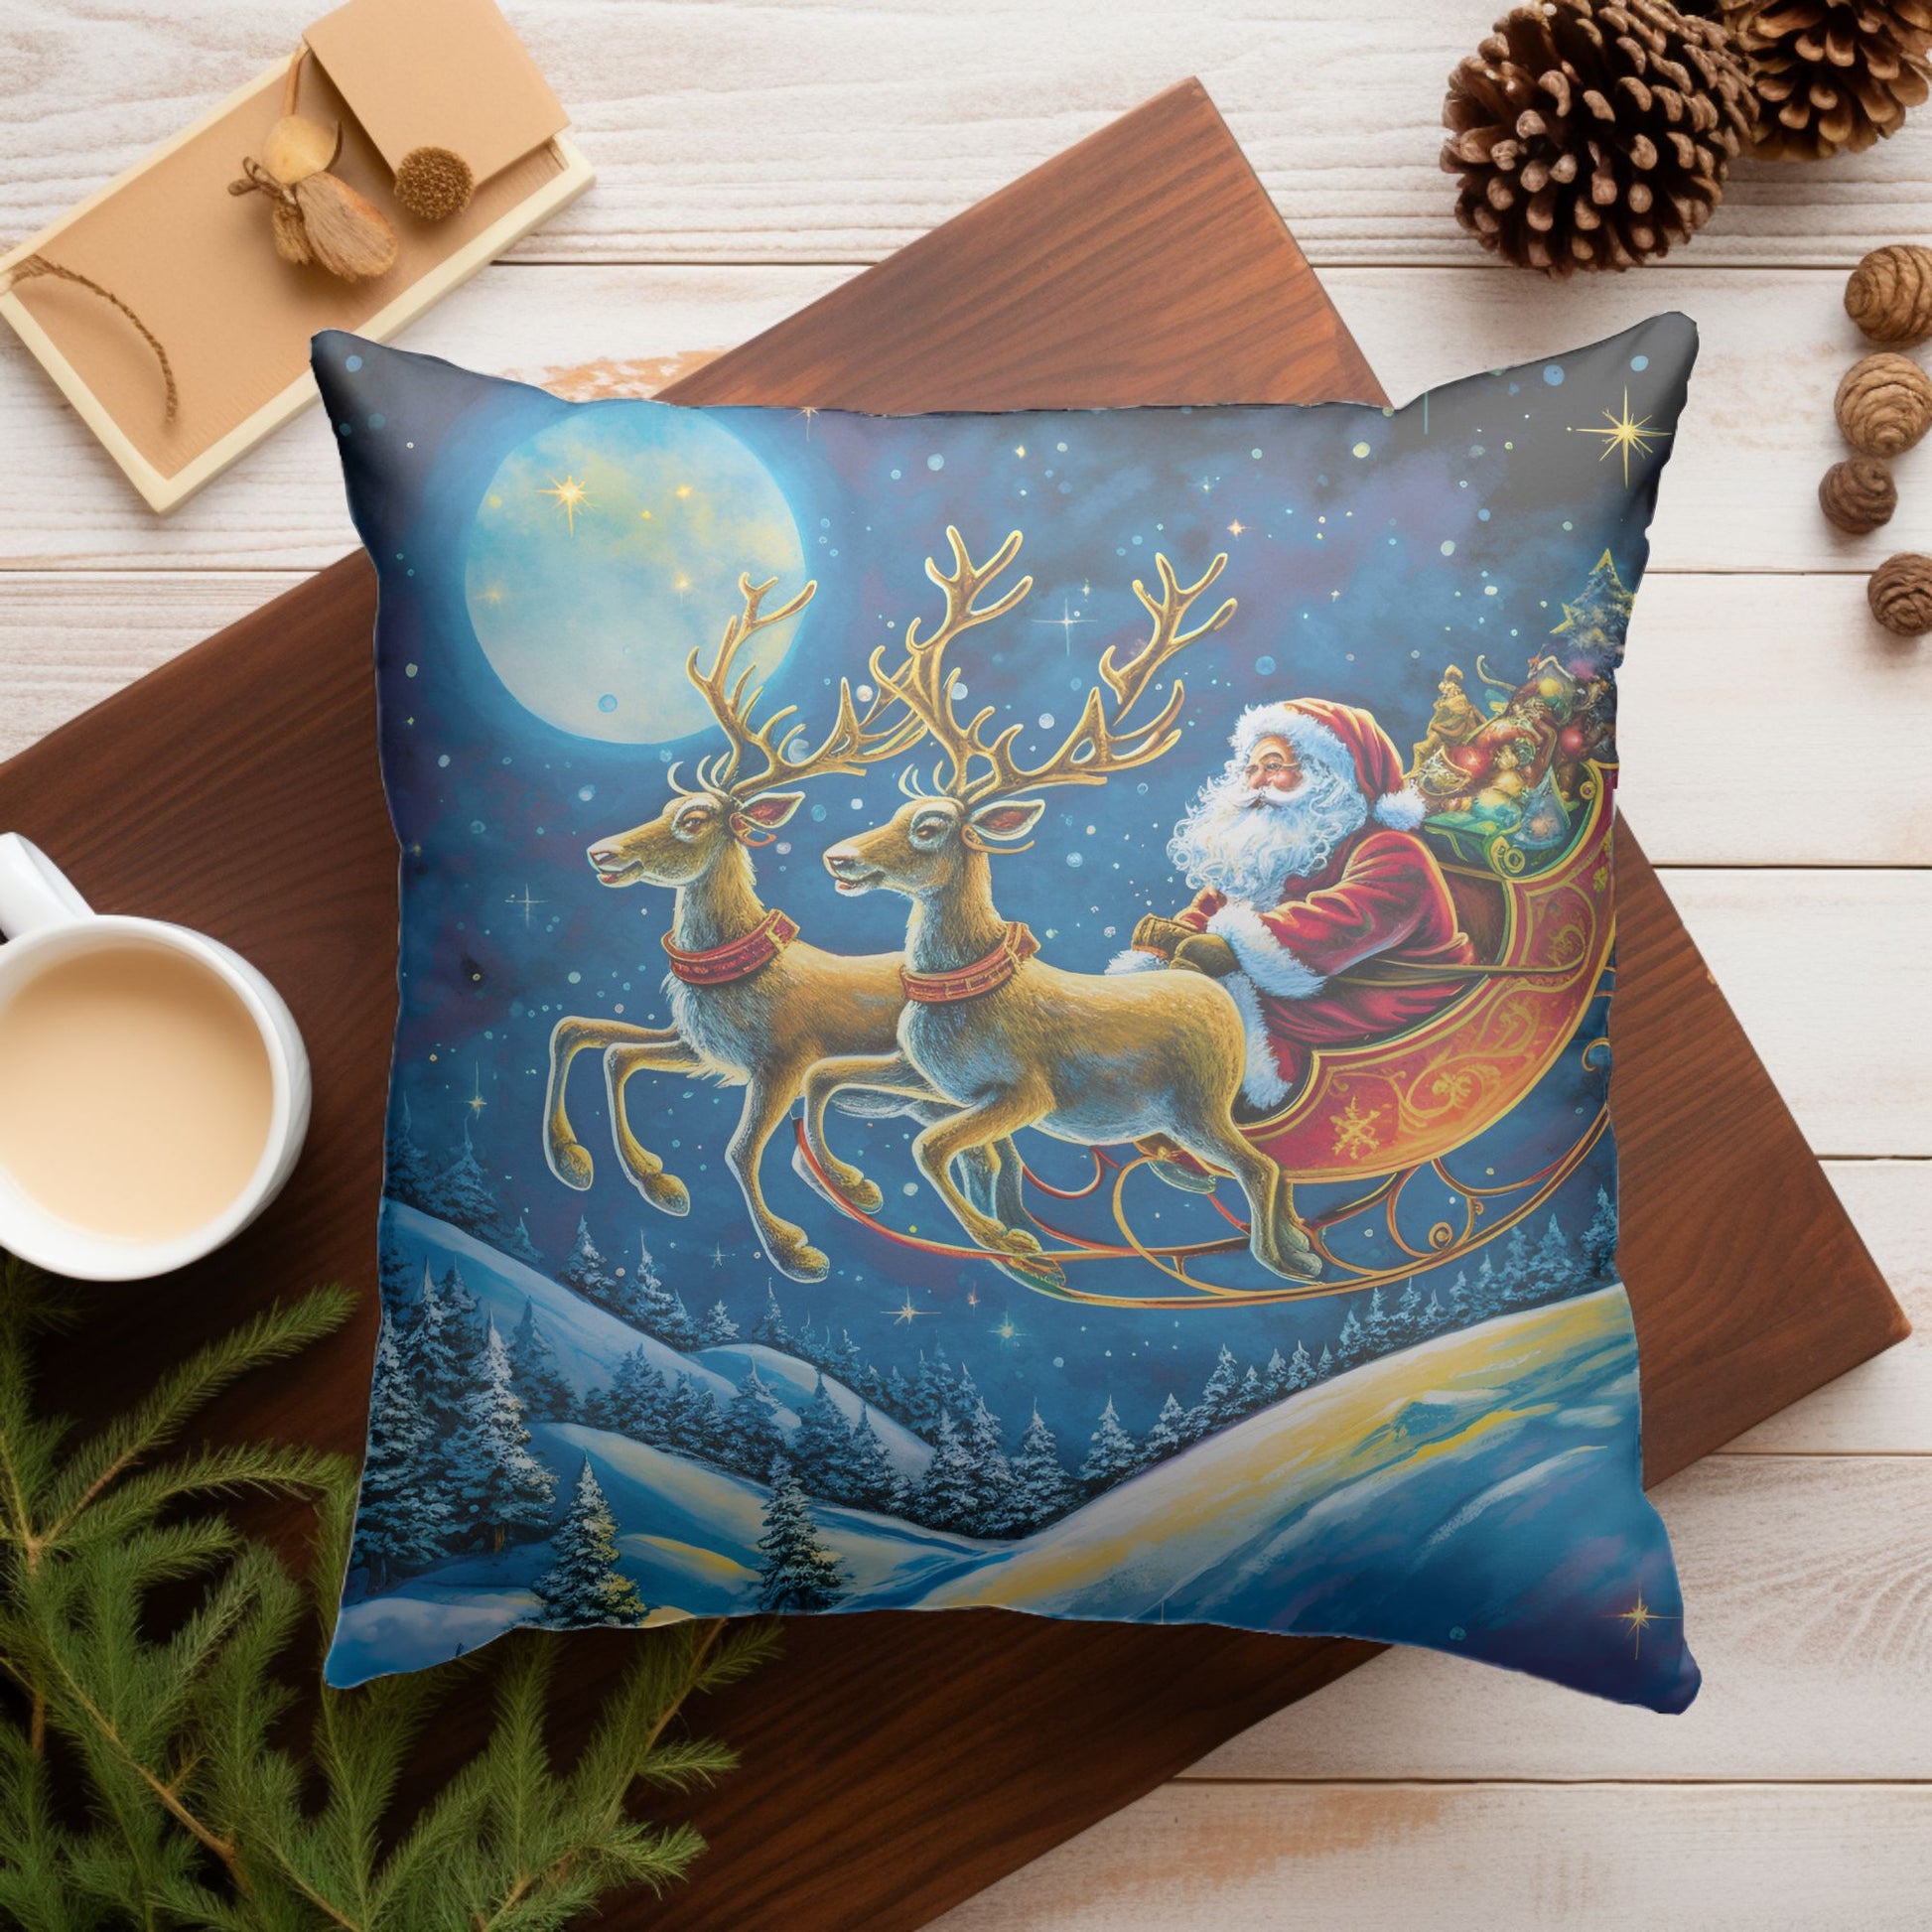 Cozy Living Room Decor with Santa and Reindeer Pillow